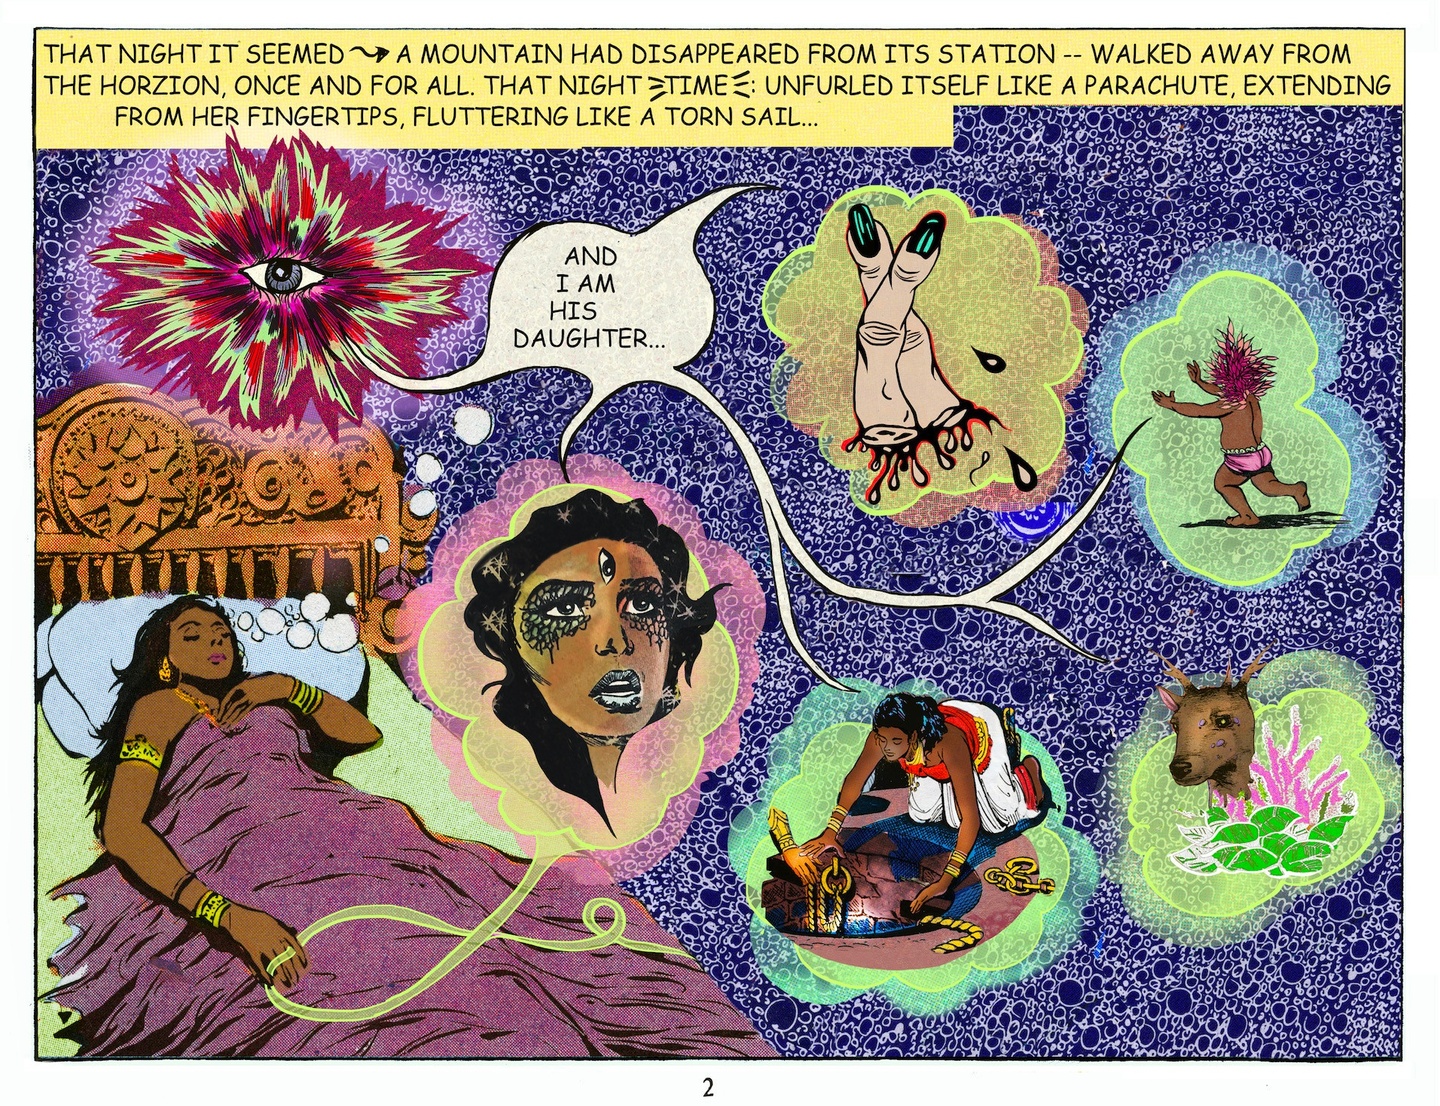 Comic book panel of a woman lying in bed dreaming, with multiple thought bubbles appearing.